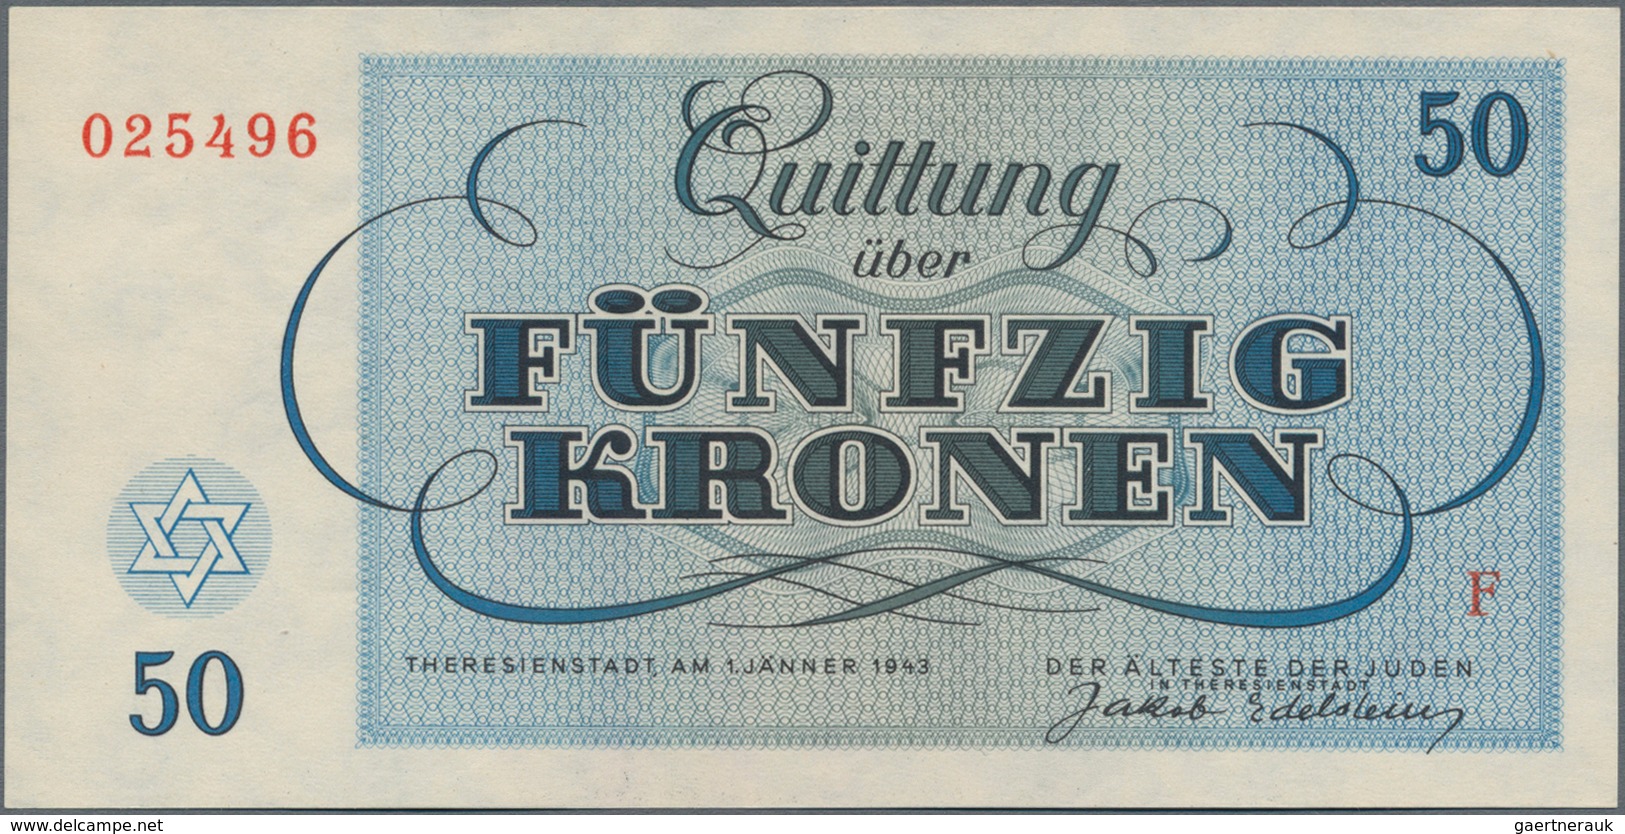 Alle Welt: Collectors album with 309 banknotes, advertising notes and bonds, comprising for example